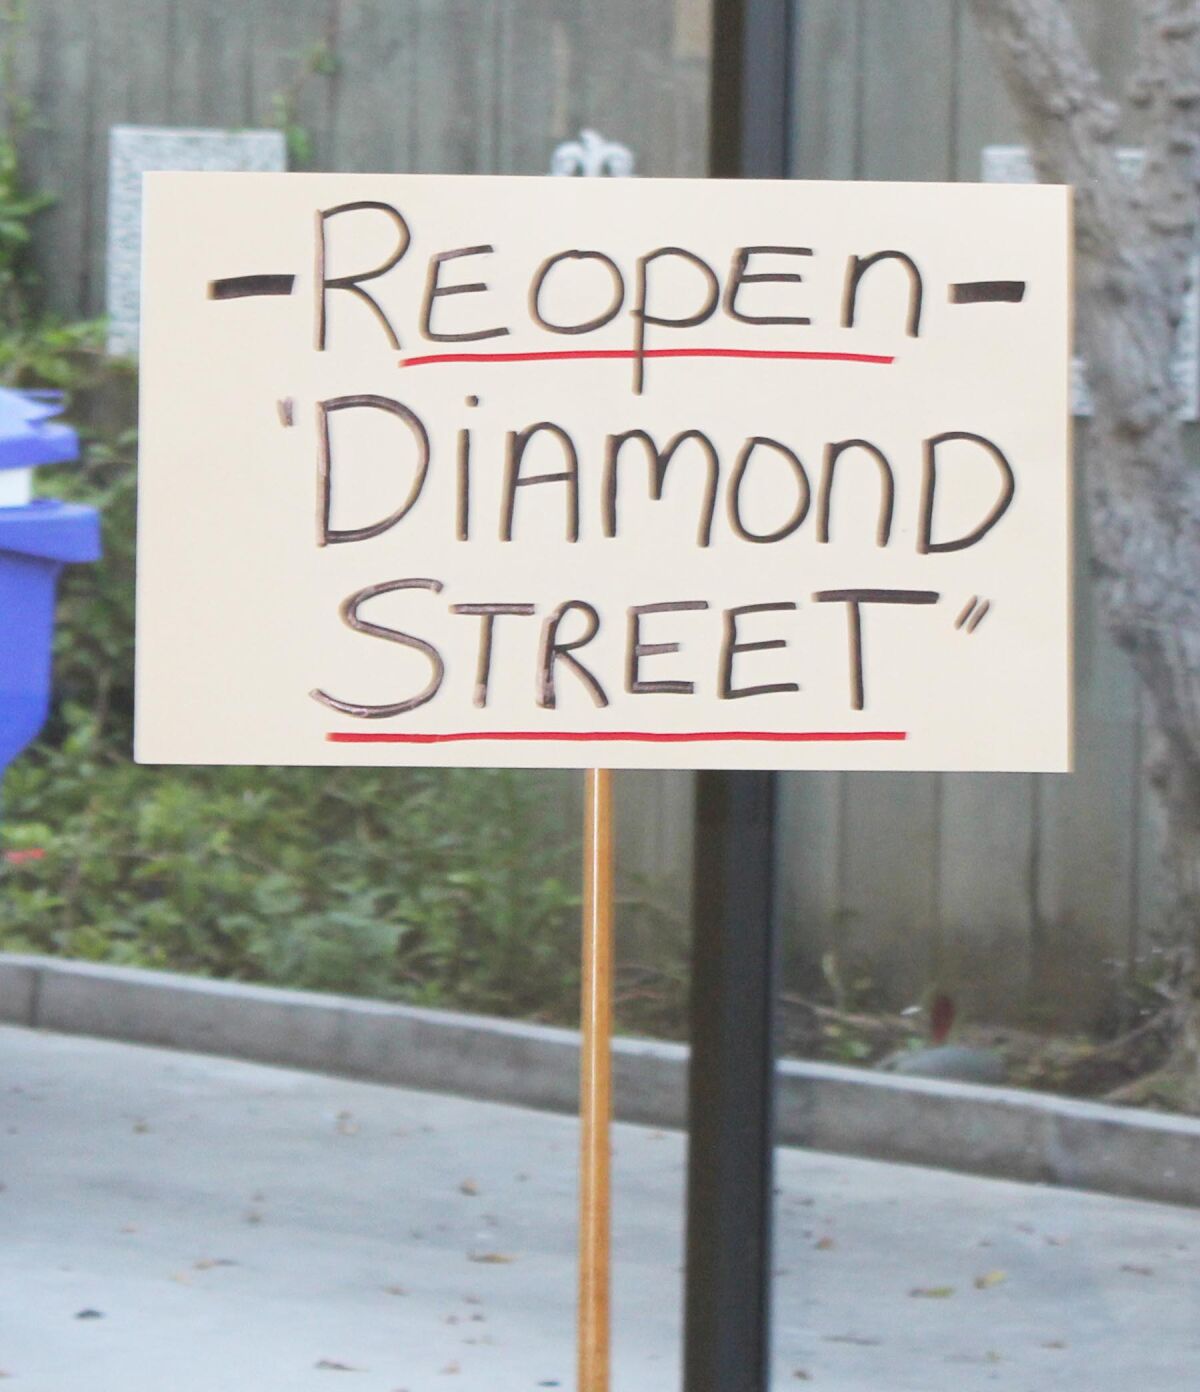 A sign brought to the meeting by someone advocating for Diamond Street to be reopened to vehicle traffic.